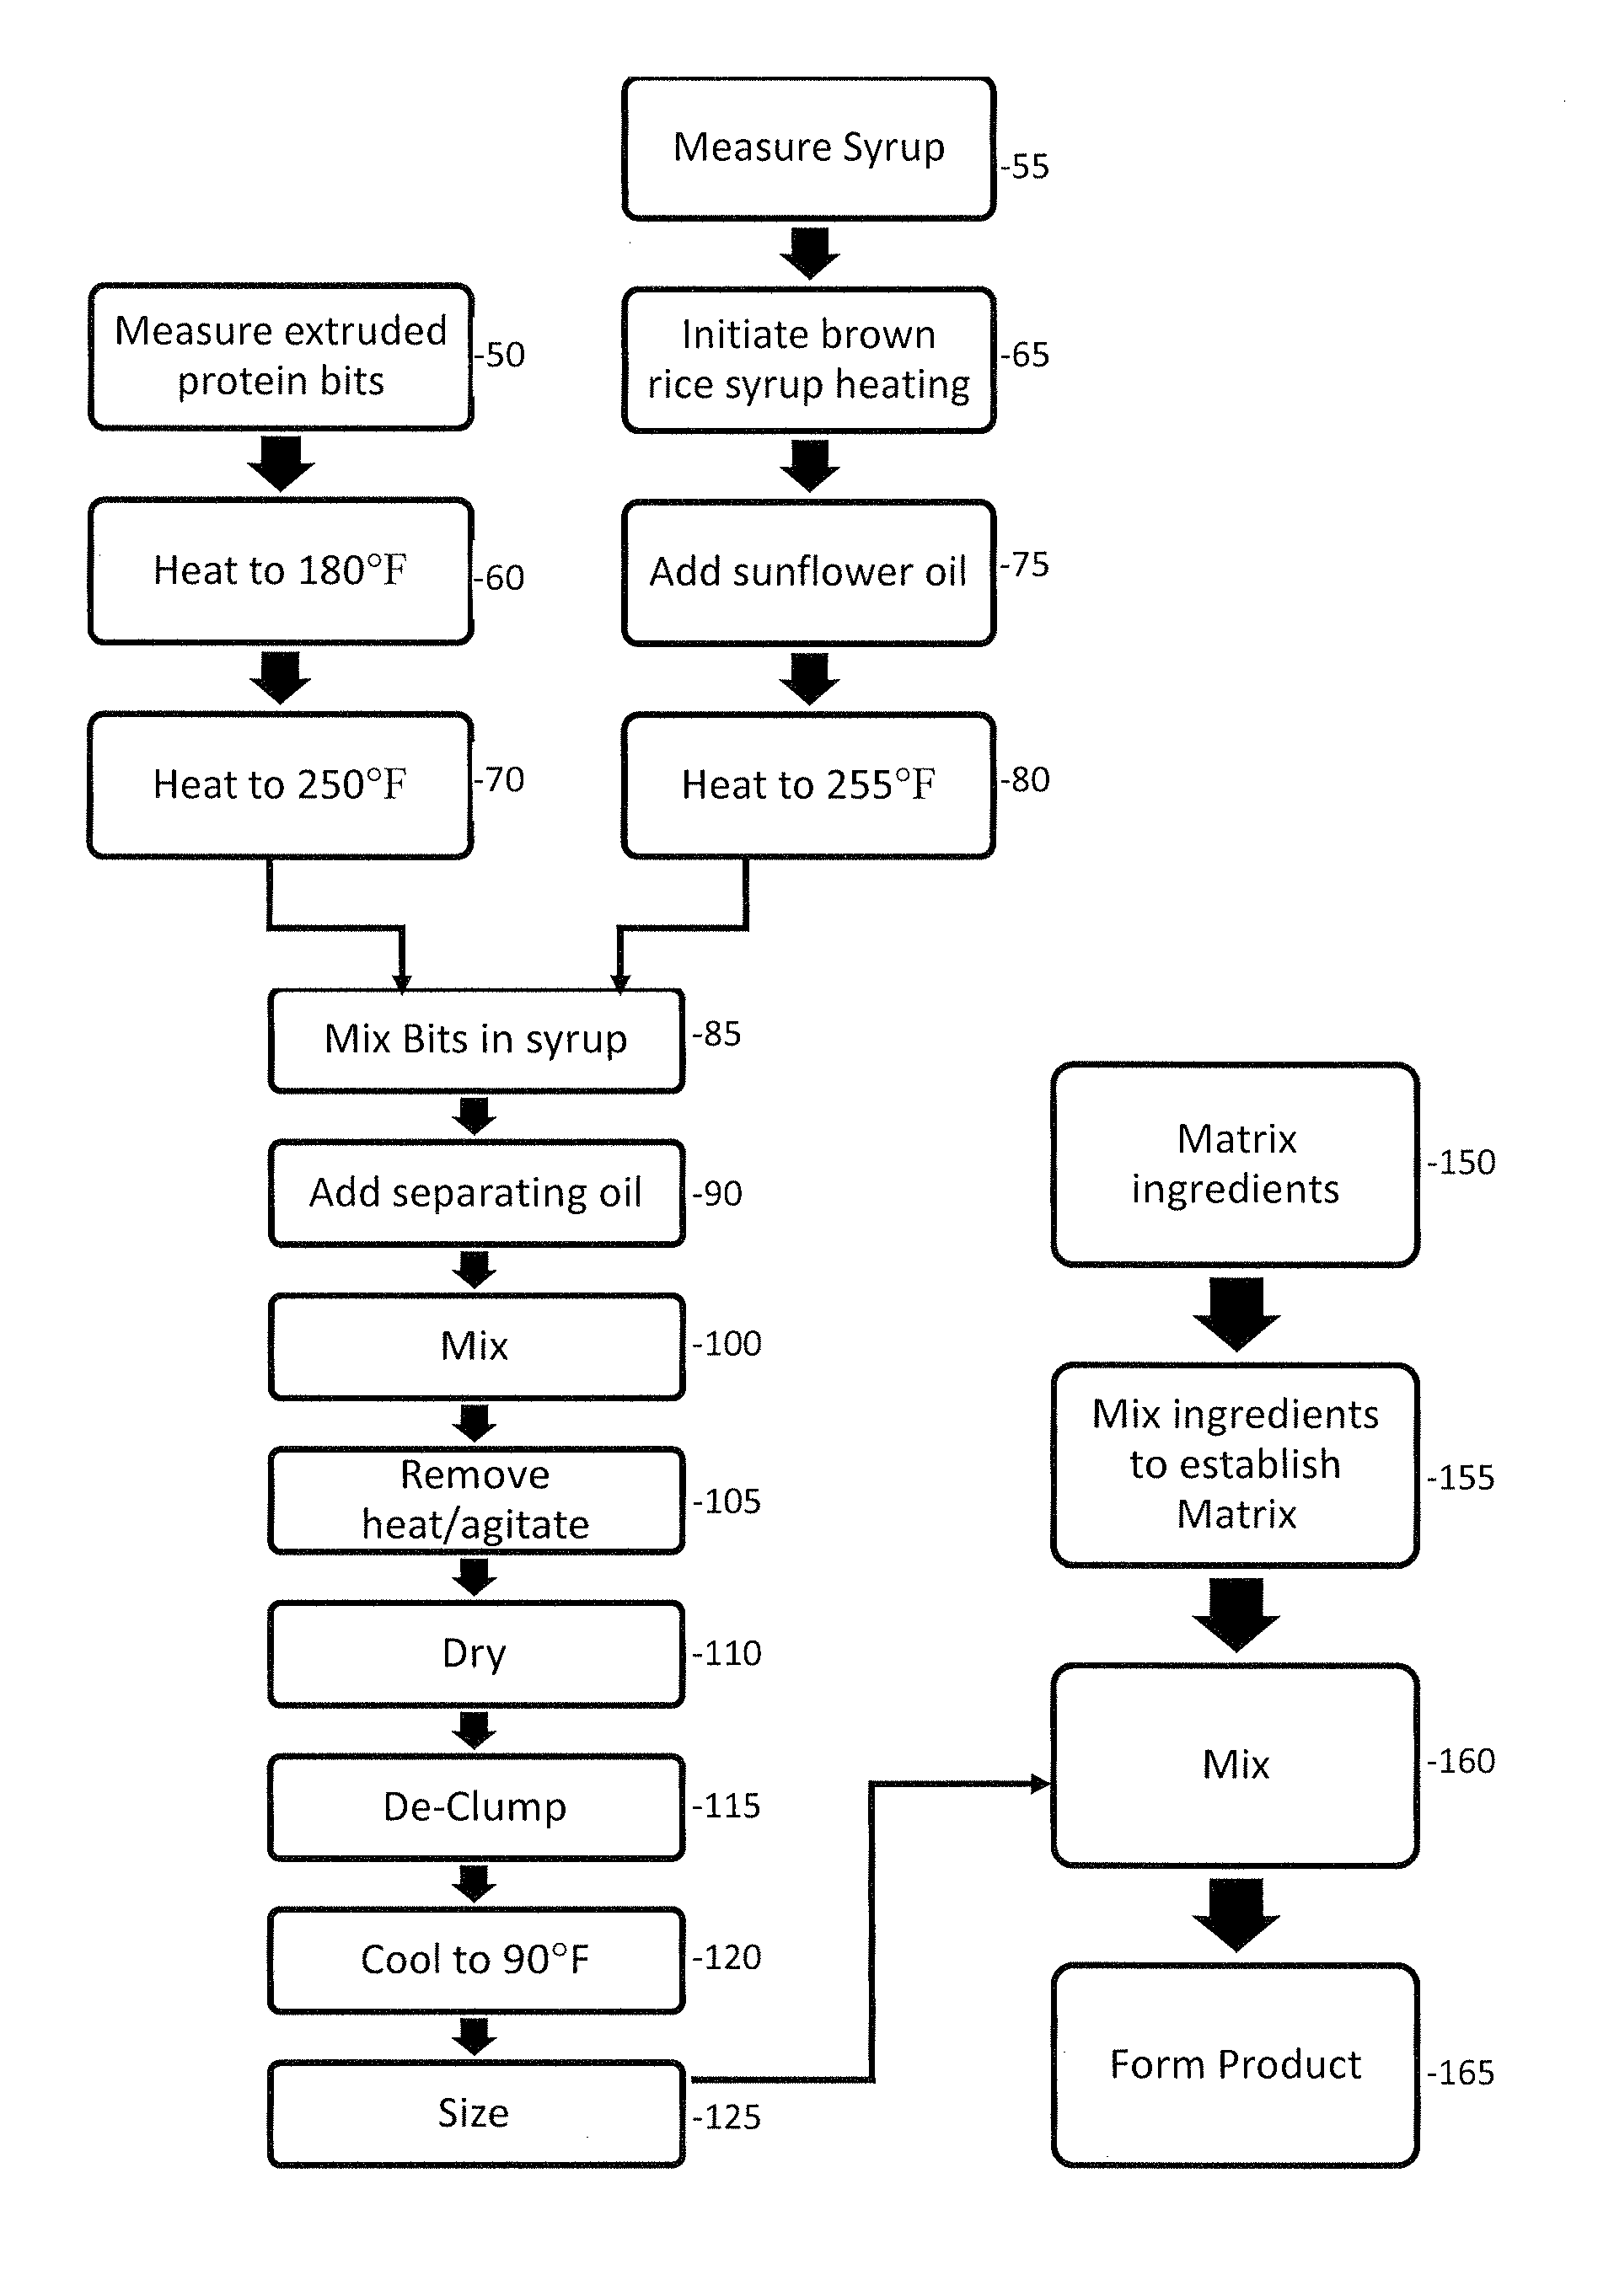 Fruit Paste-Based Food Product Incorporating High Protein Particulates